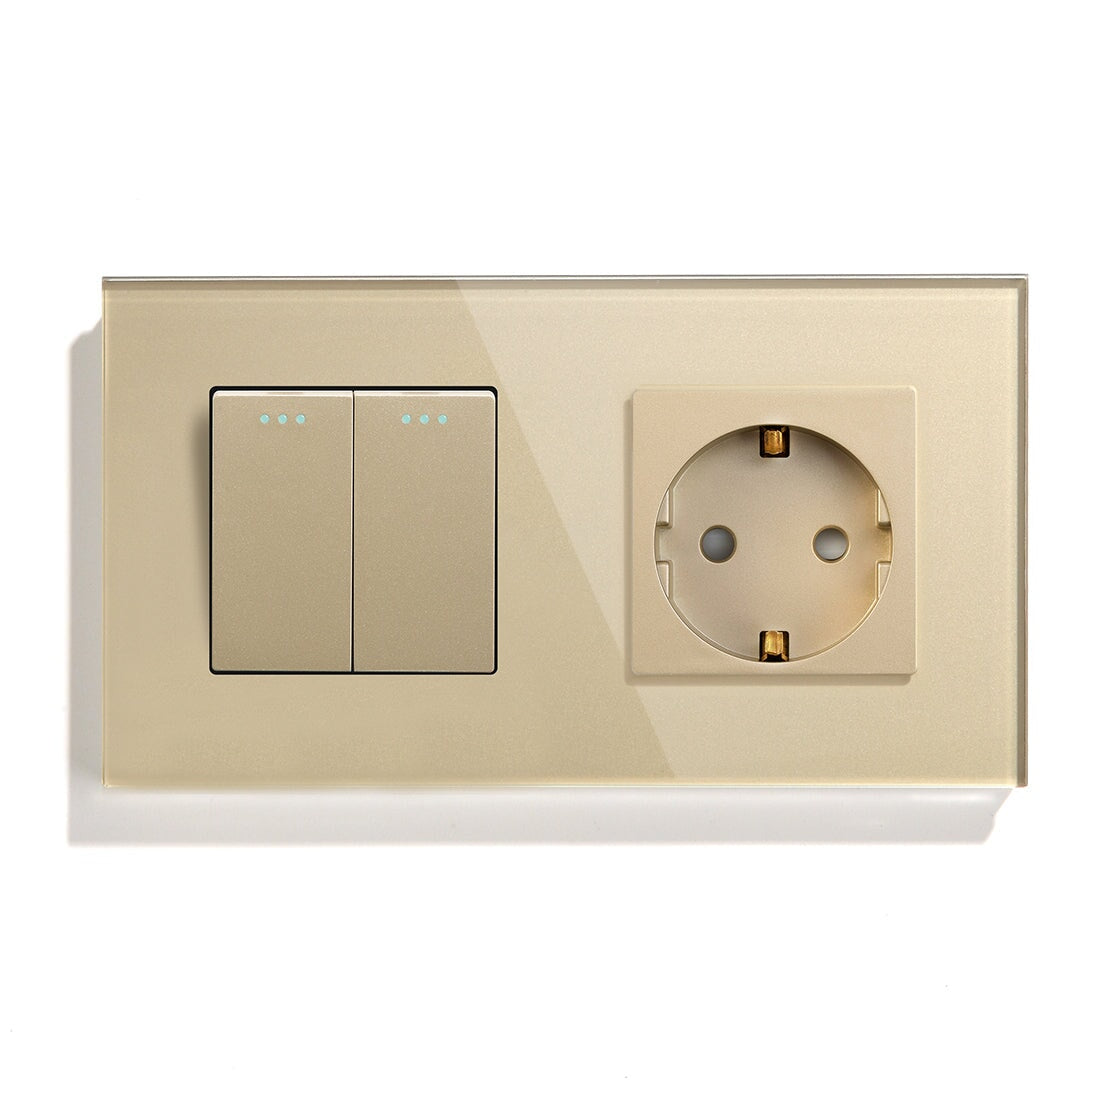 BSEED Mechanical 1/2/3 Gang 1/2Way Touch Light Switch With Normal Eu Socket Power Outlets & Sockets Bseedswitch Golden 2Gang 1Way